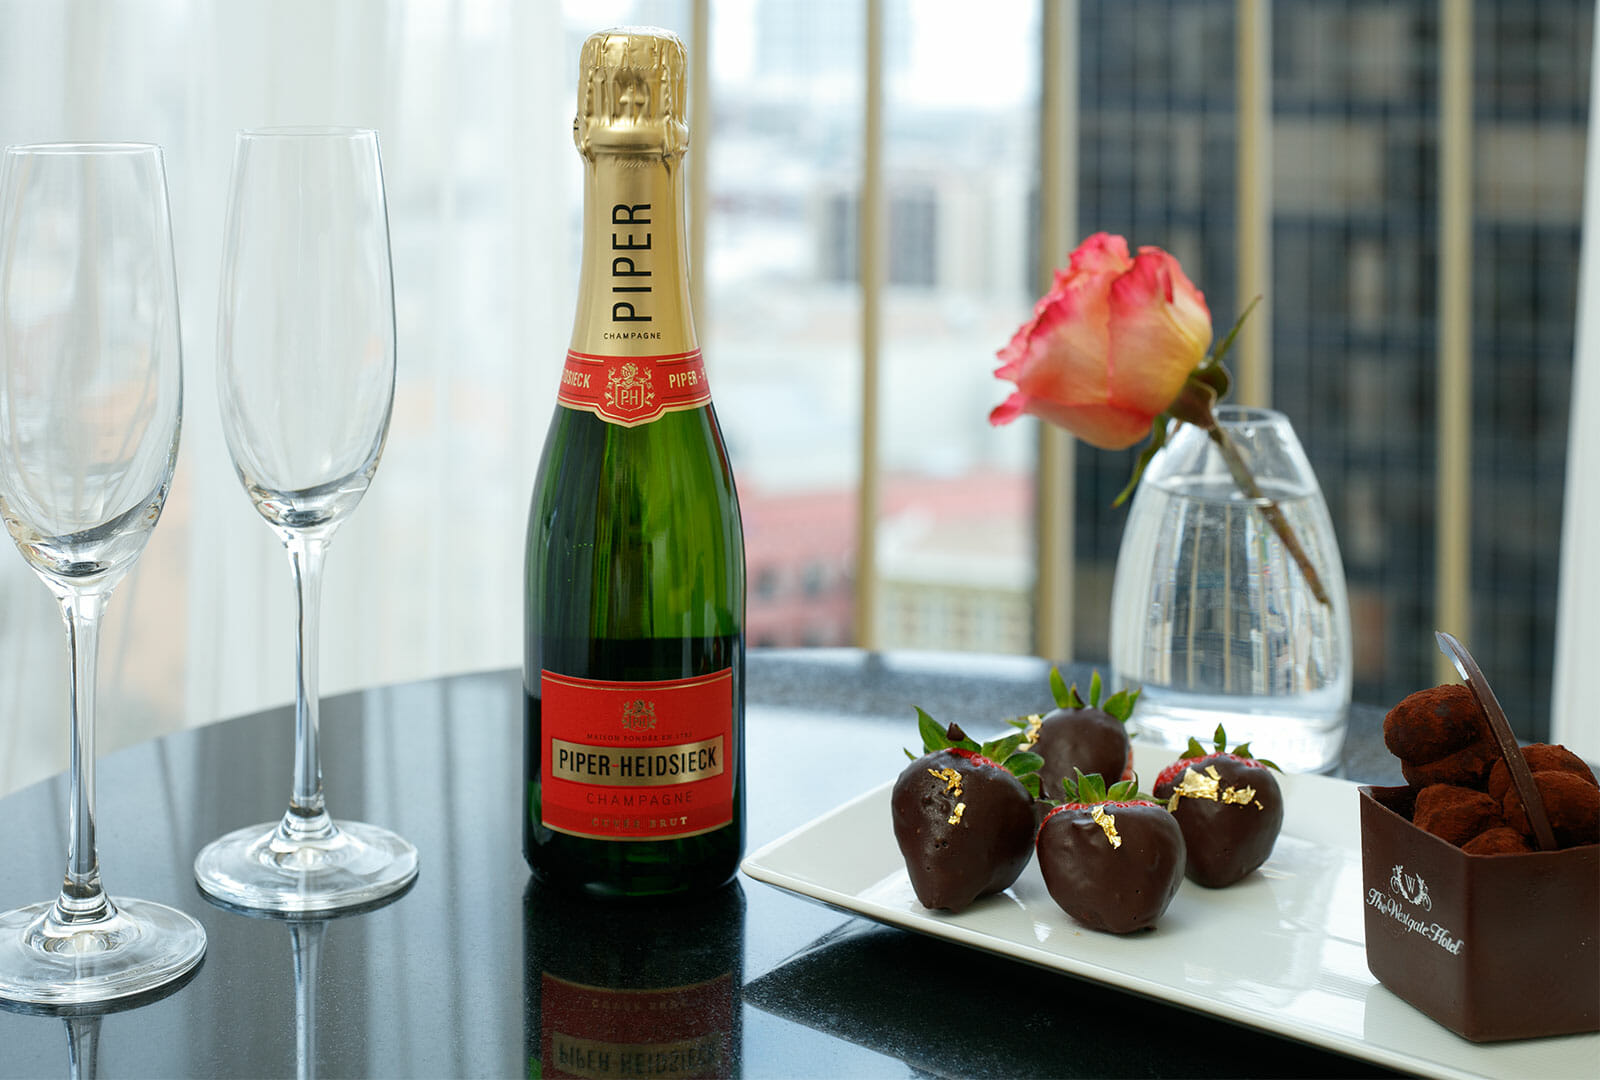 Hotel room amenities - champagne and chocolate strawberries